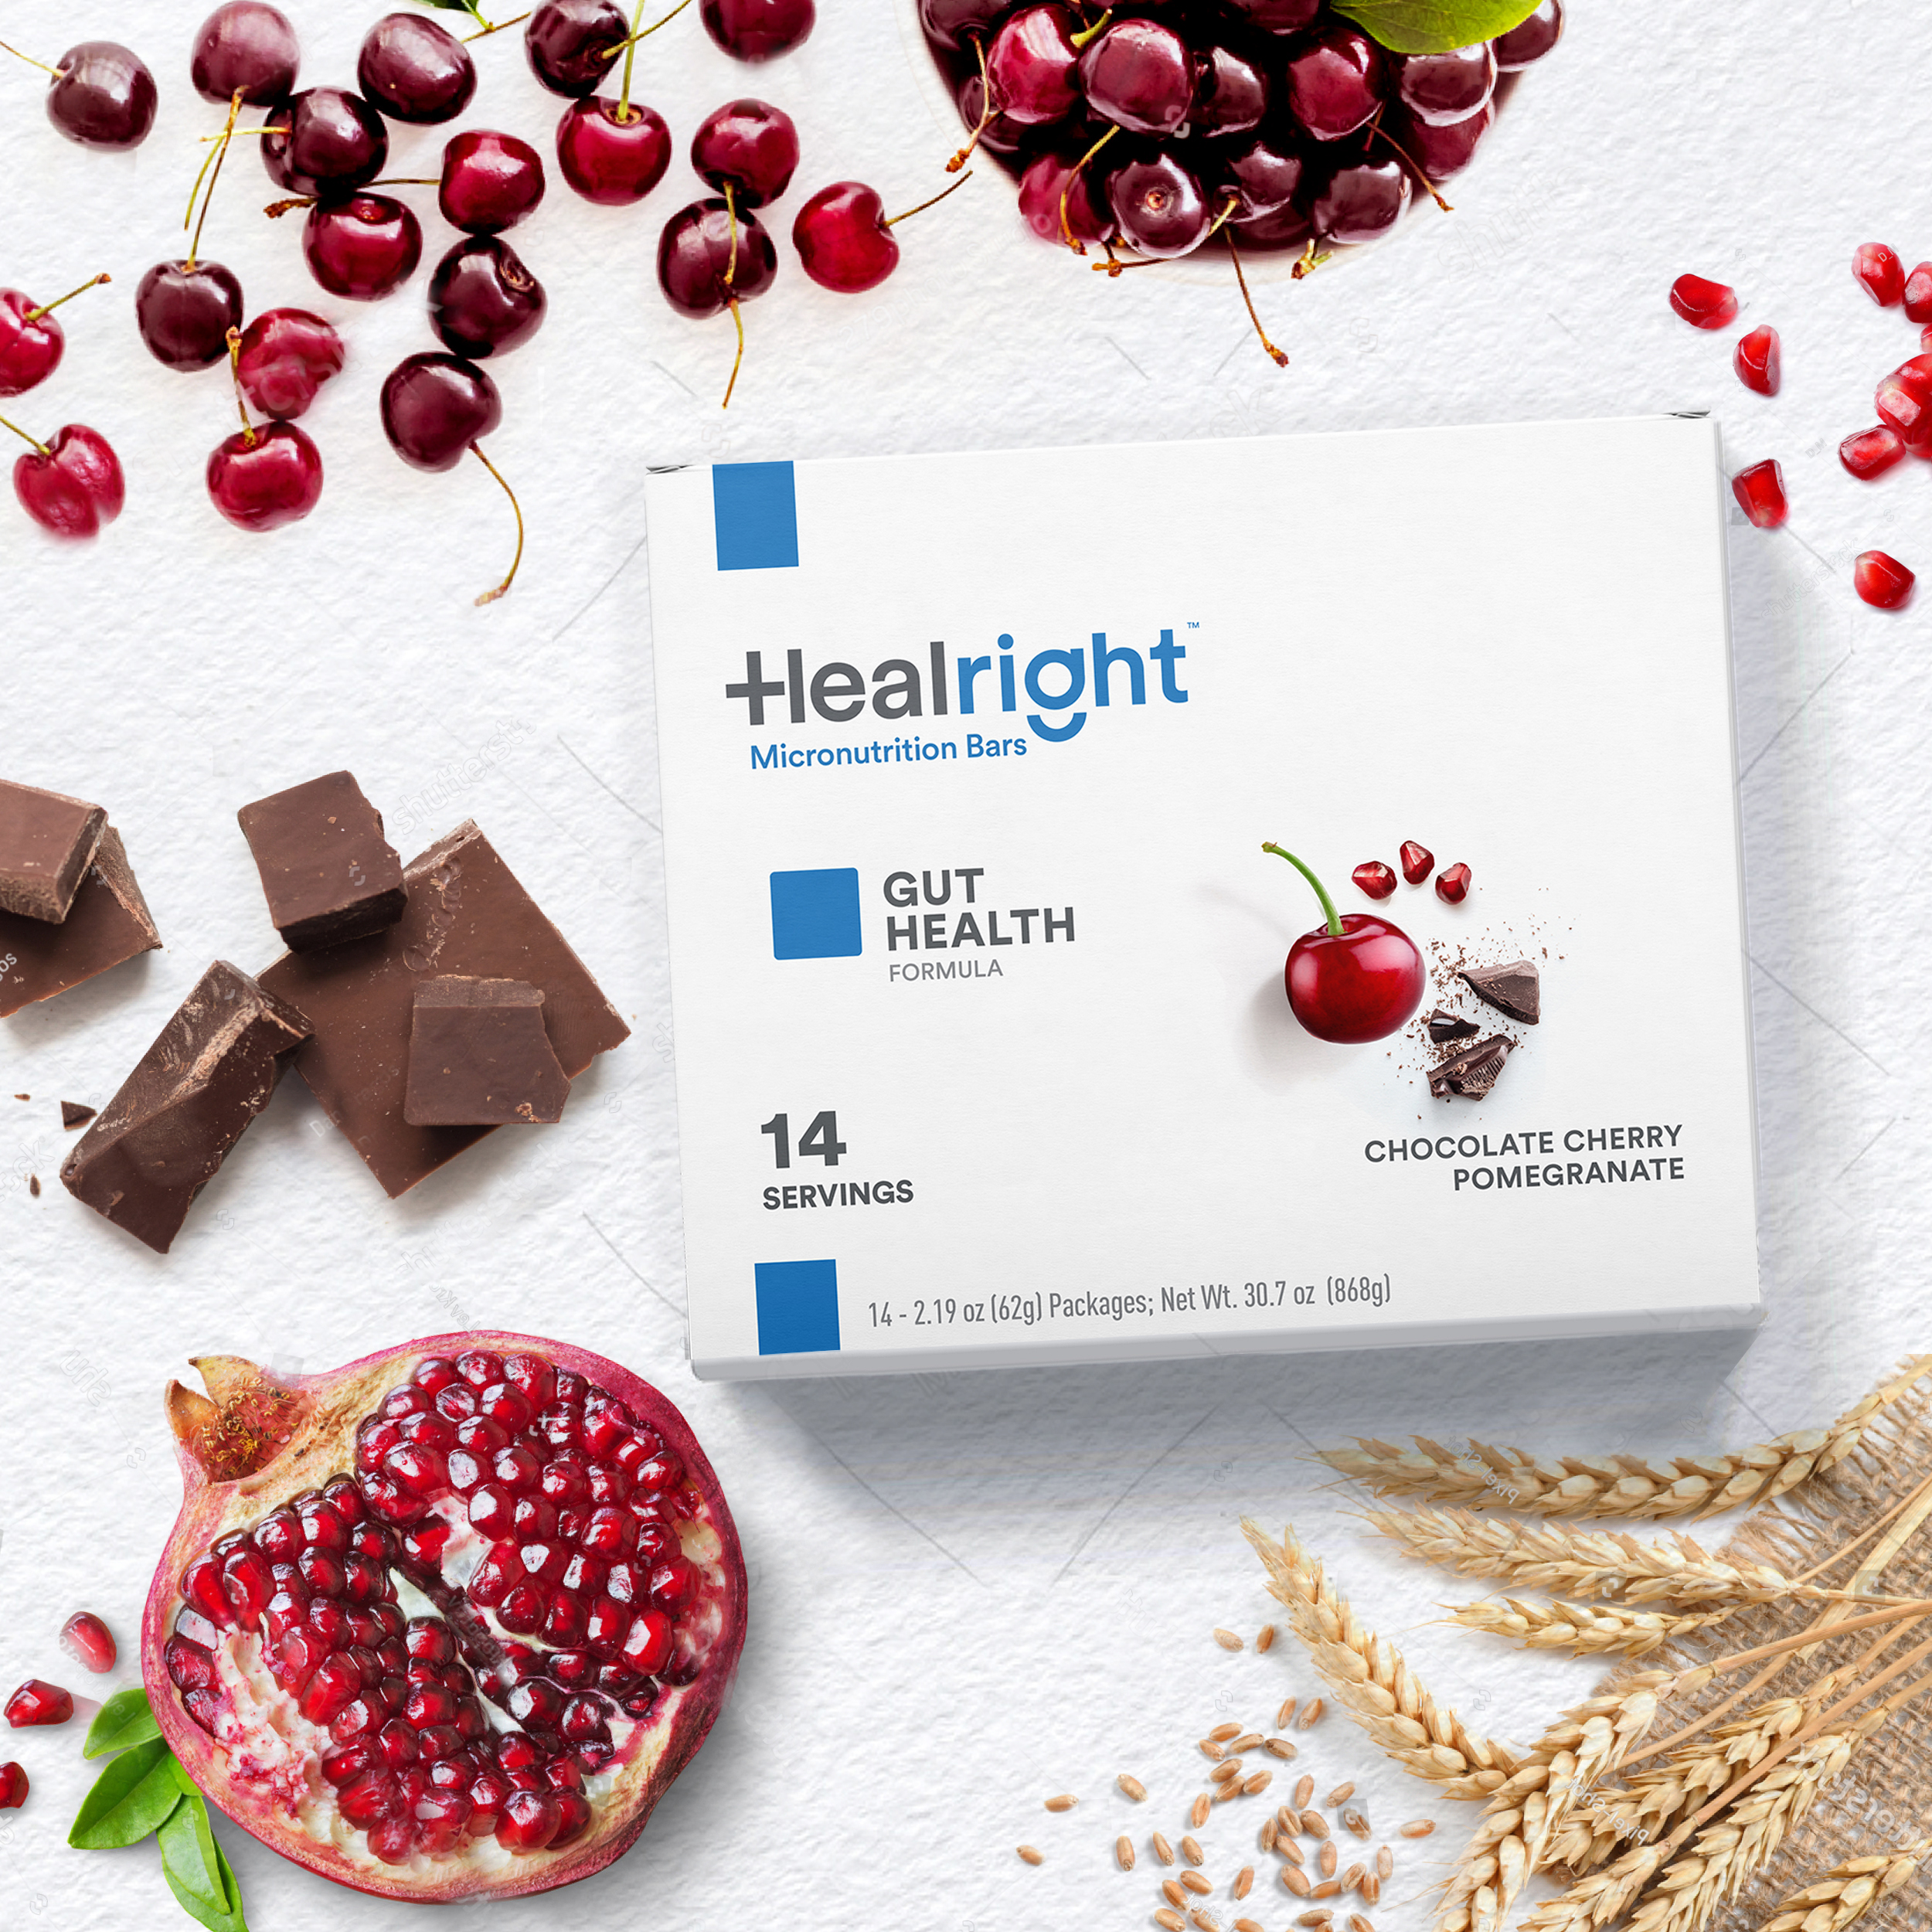 Healright Gut Health Daily with Chocolate Cherry Pomegranate flavor